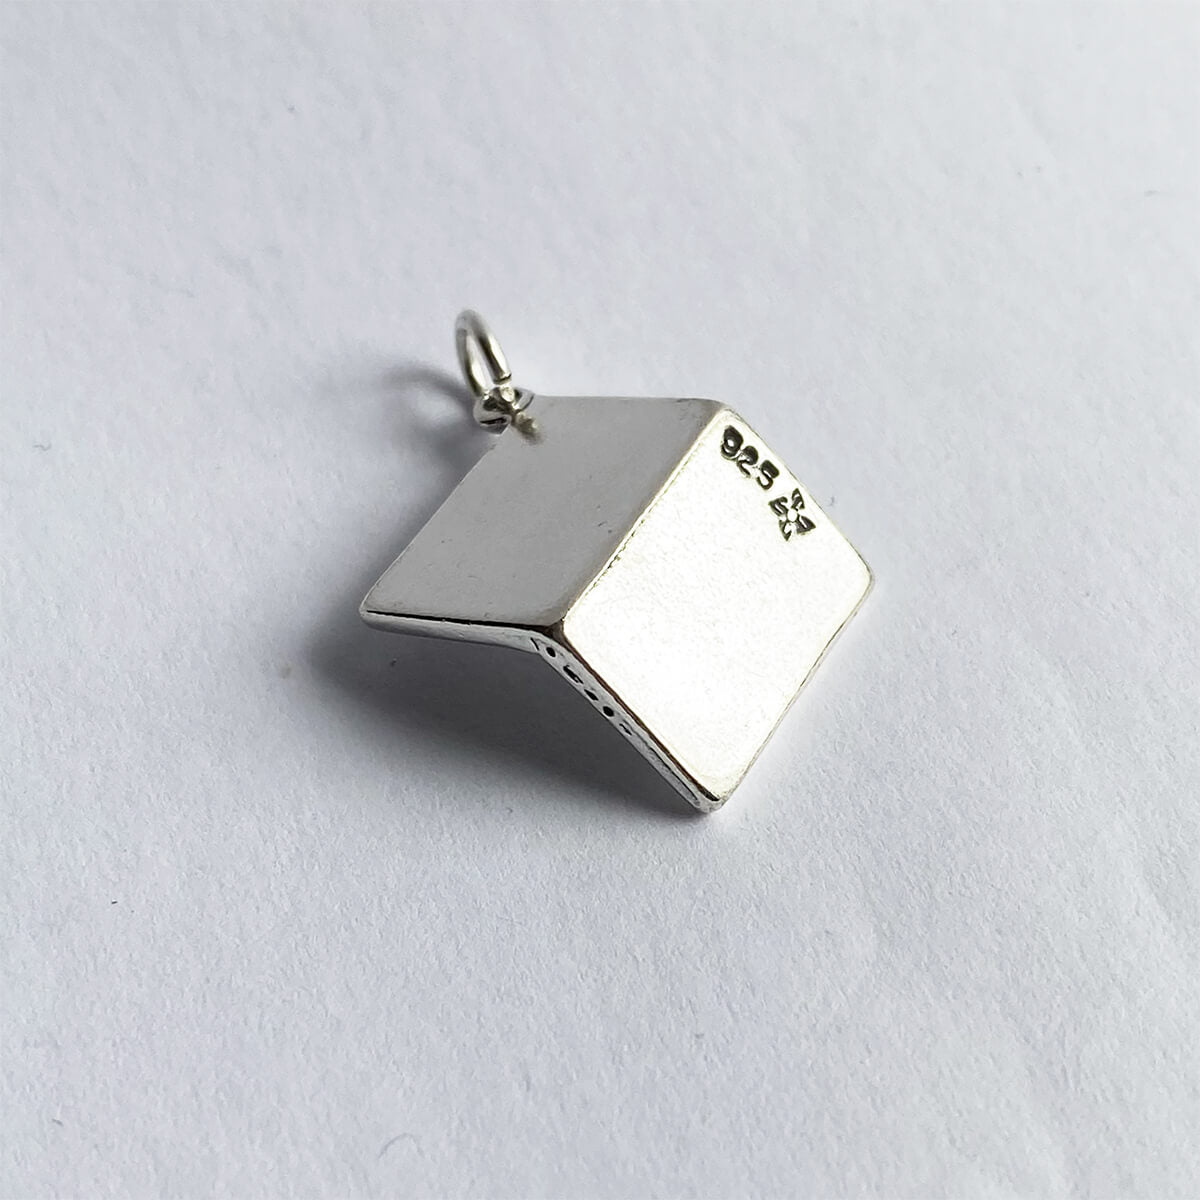 Sterling silver laptop computer charm pendant from Charmarama Charms